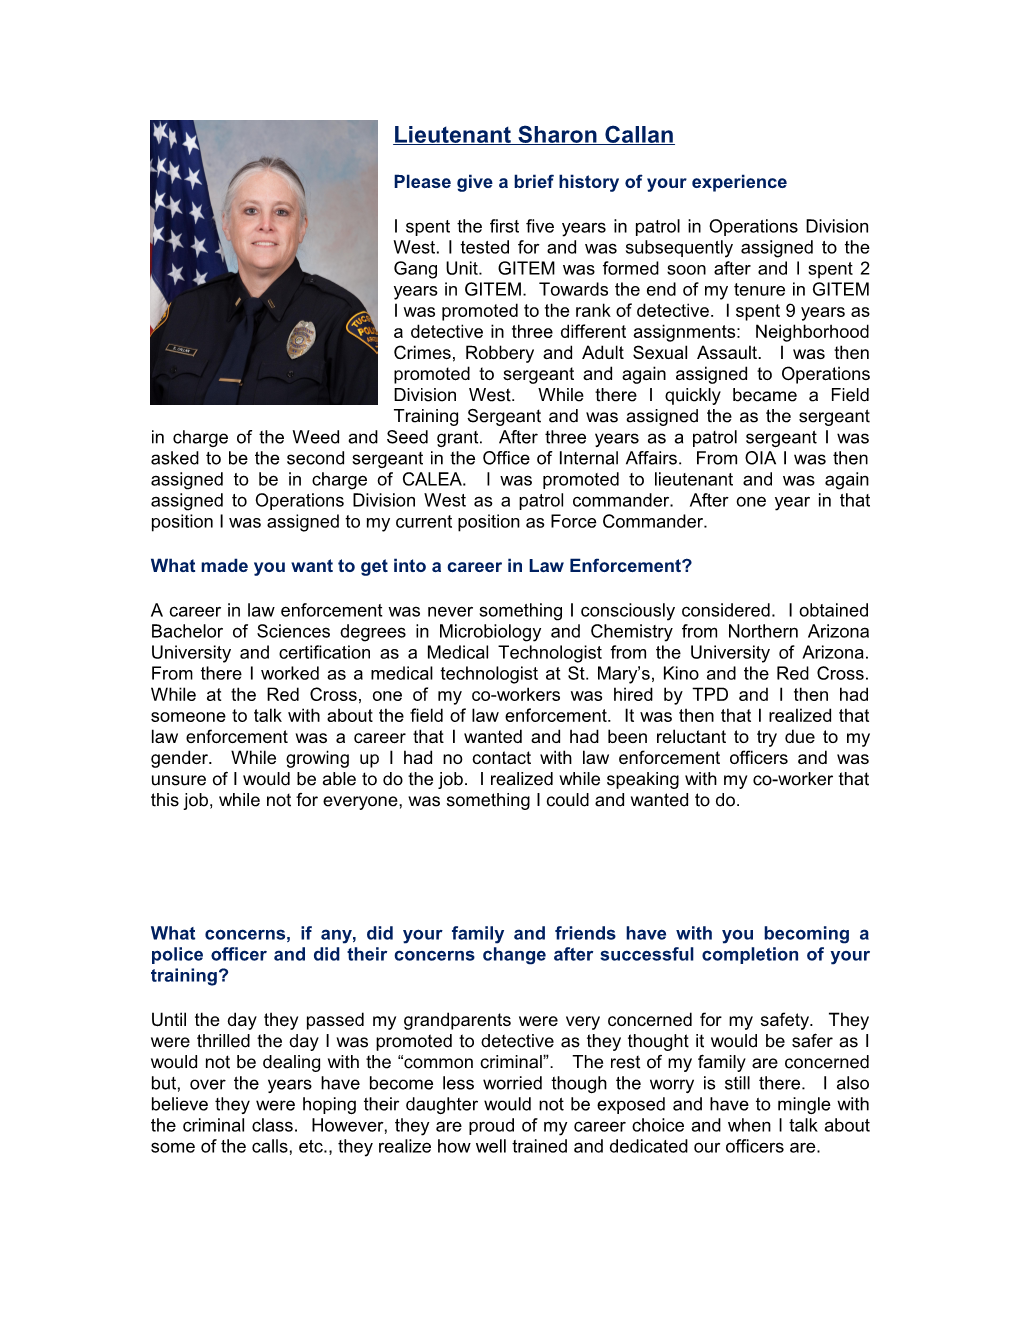 Women in Policing Questionnaire s1